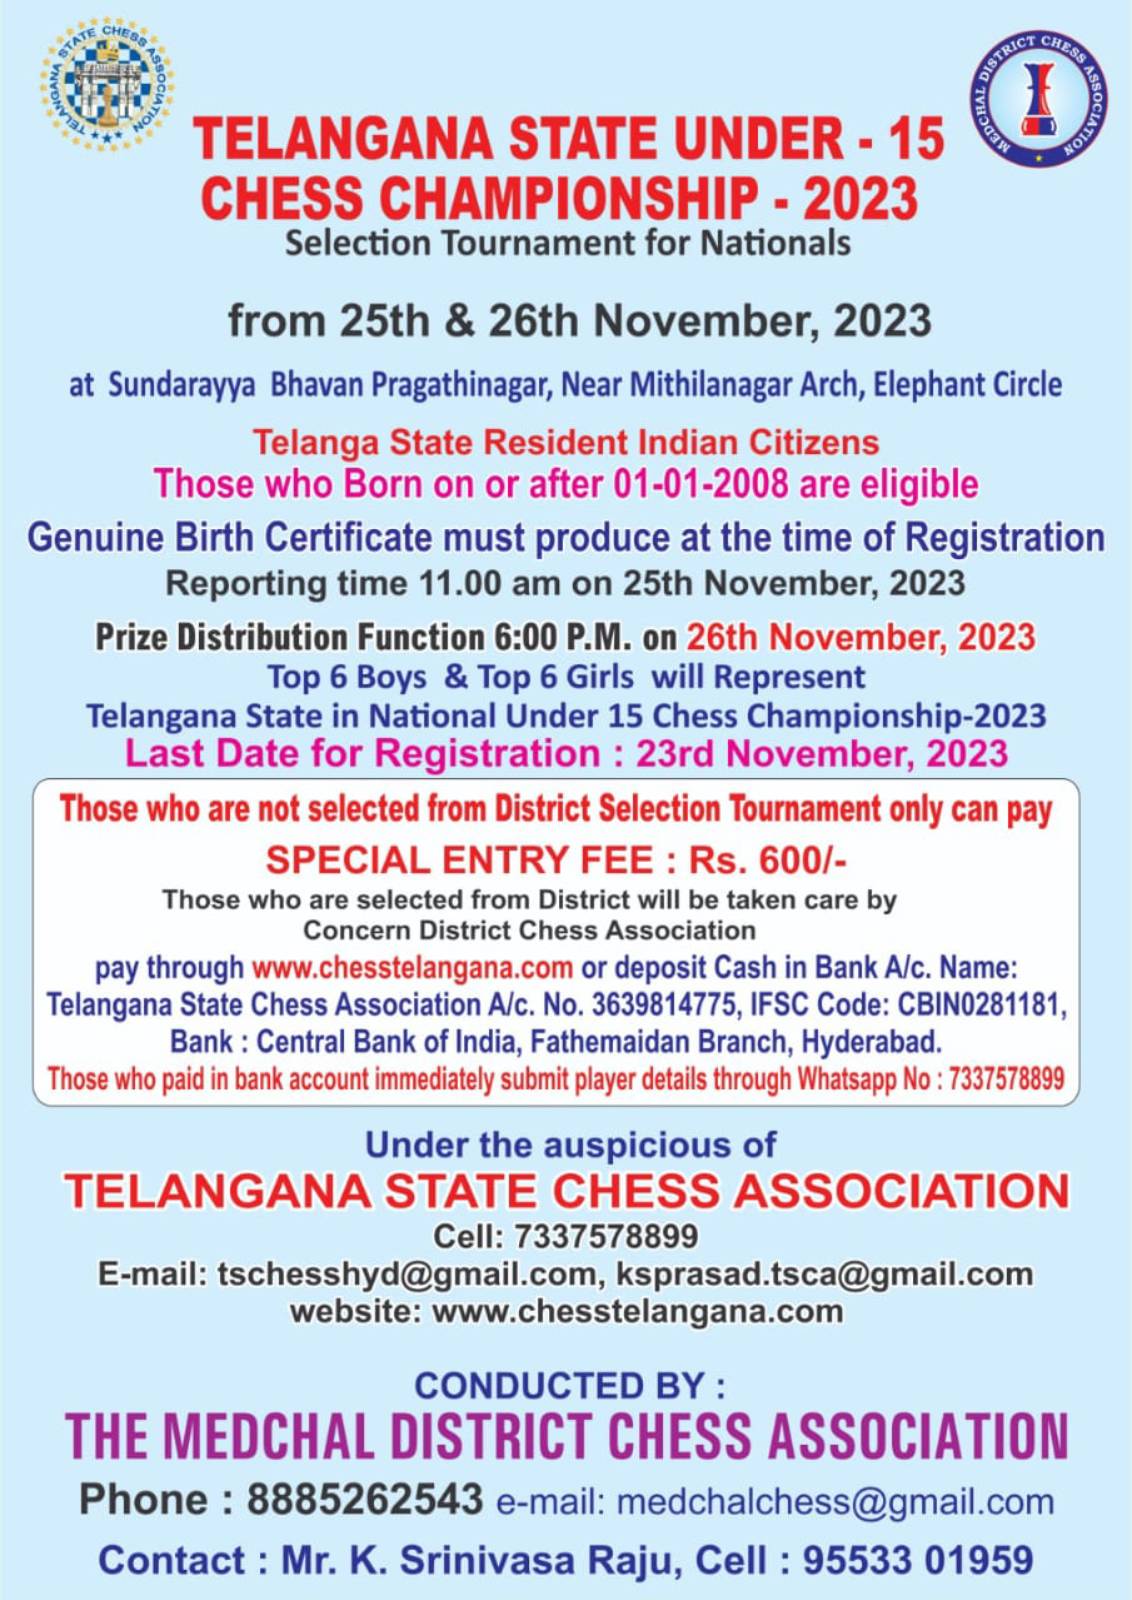 All India Fide Rapid Rating Chess Tournament at Hyderabad from